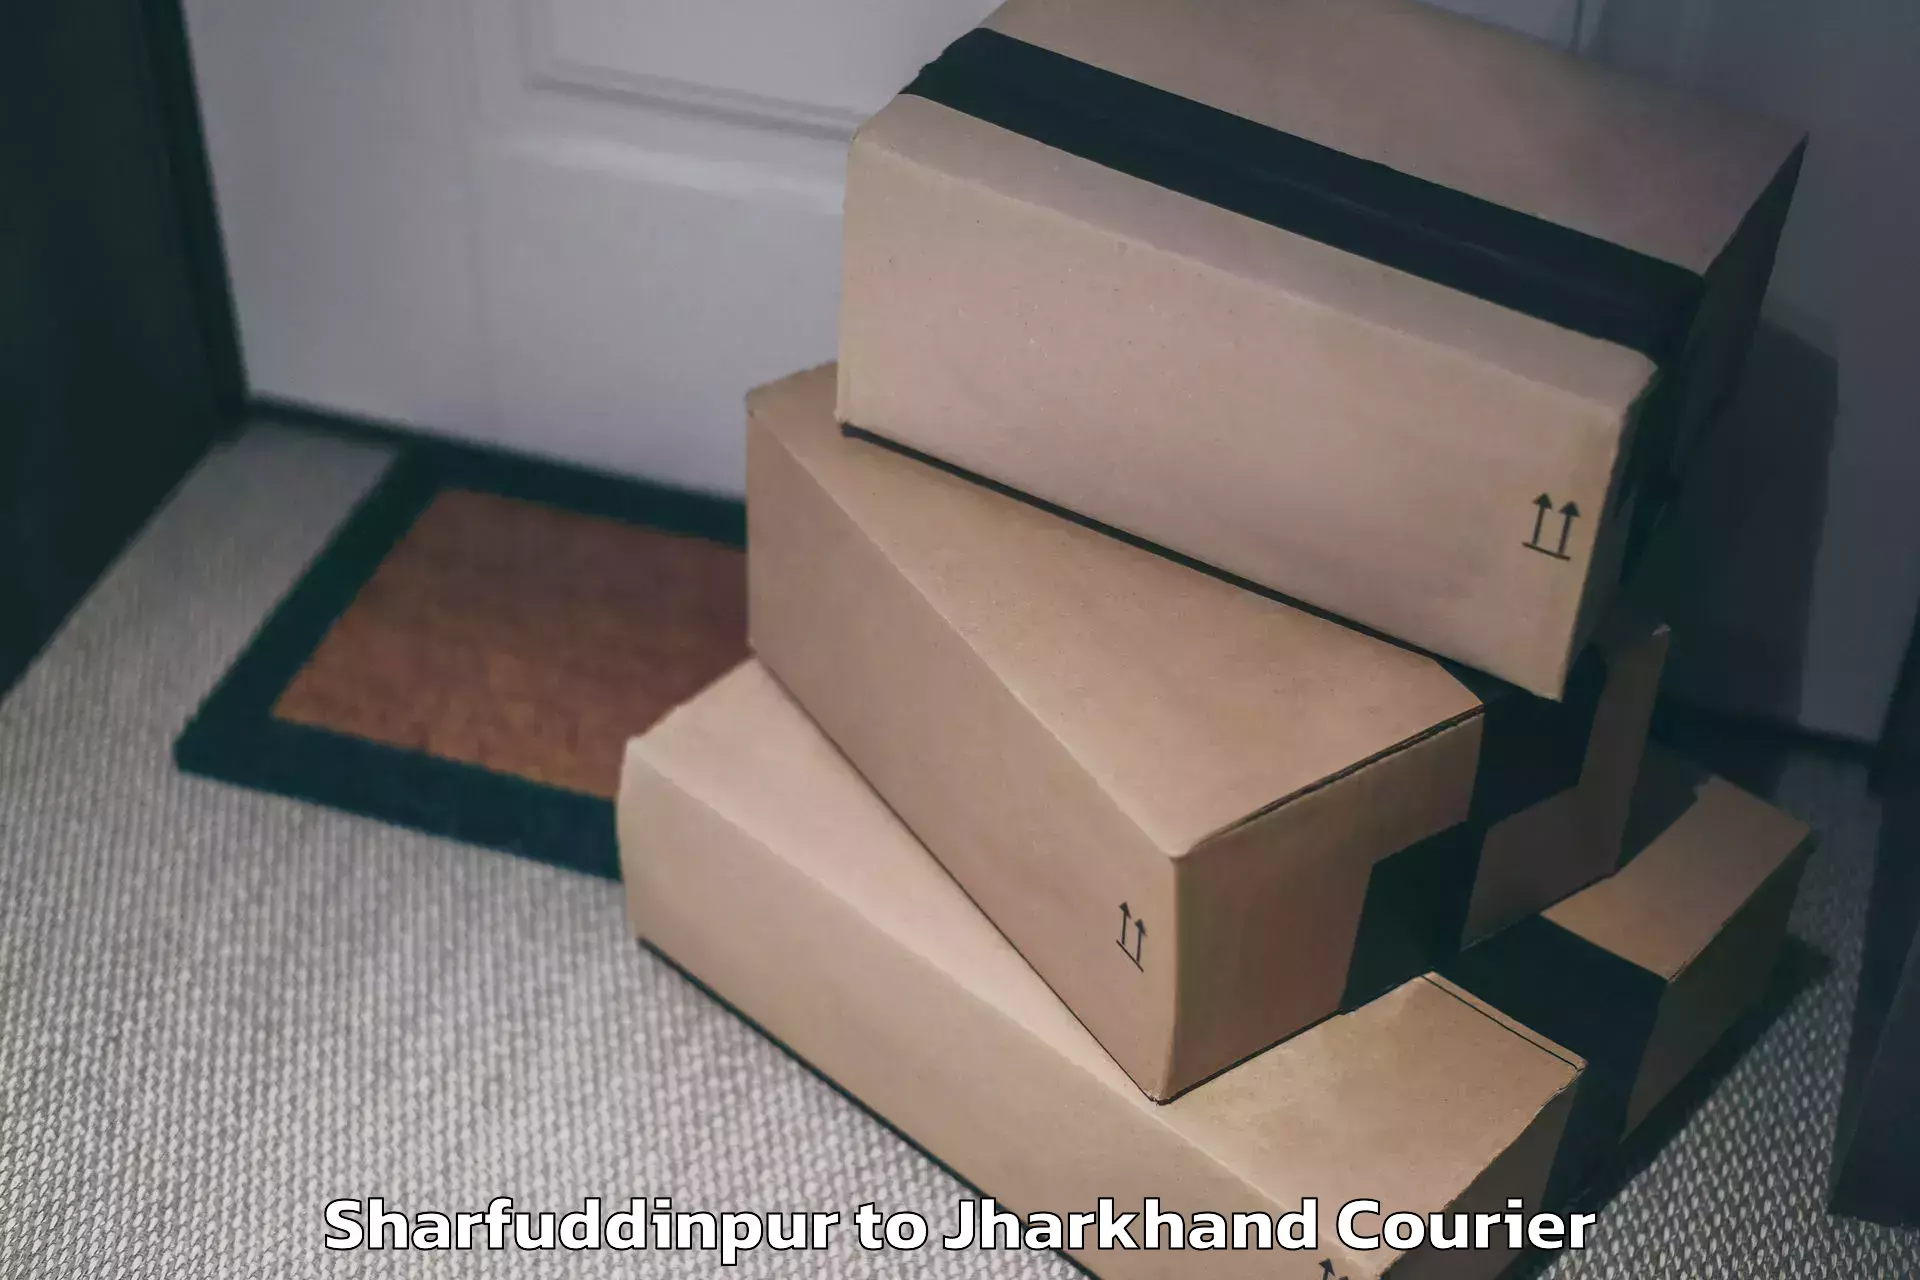 Online luggage shipping booking Sharfuddinpur to Hazaribagh